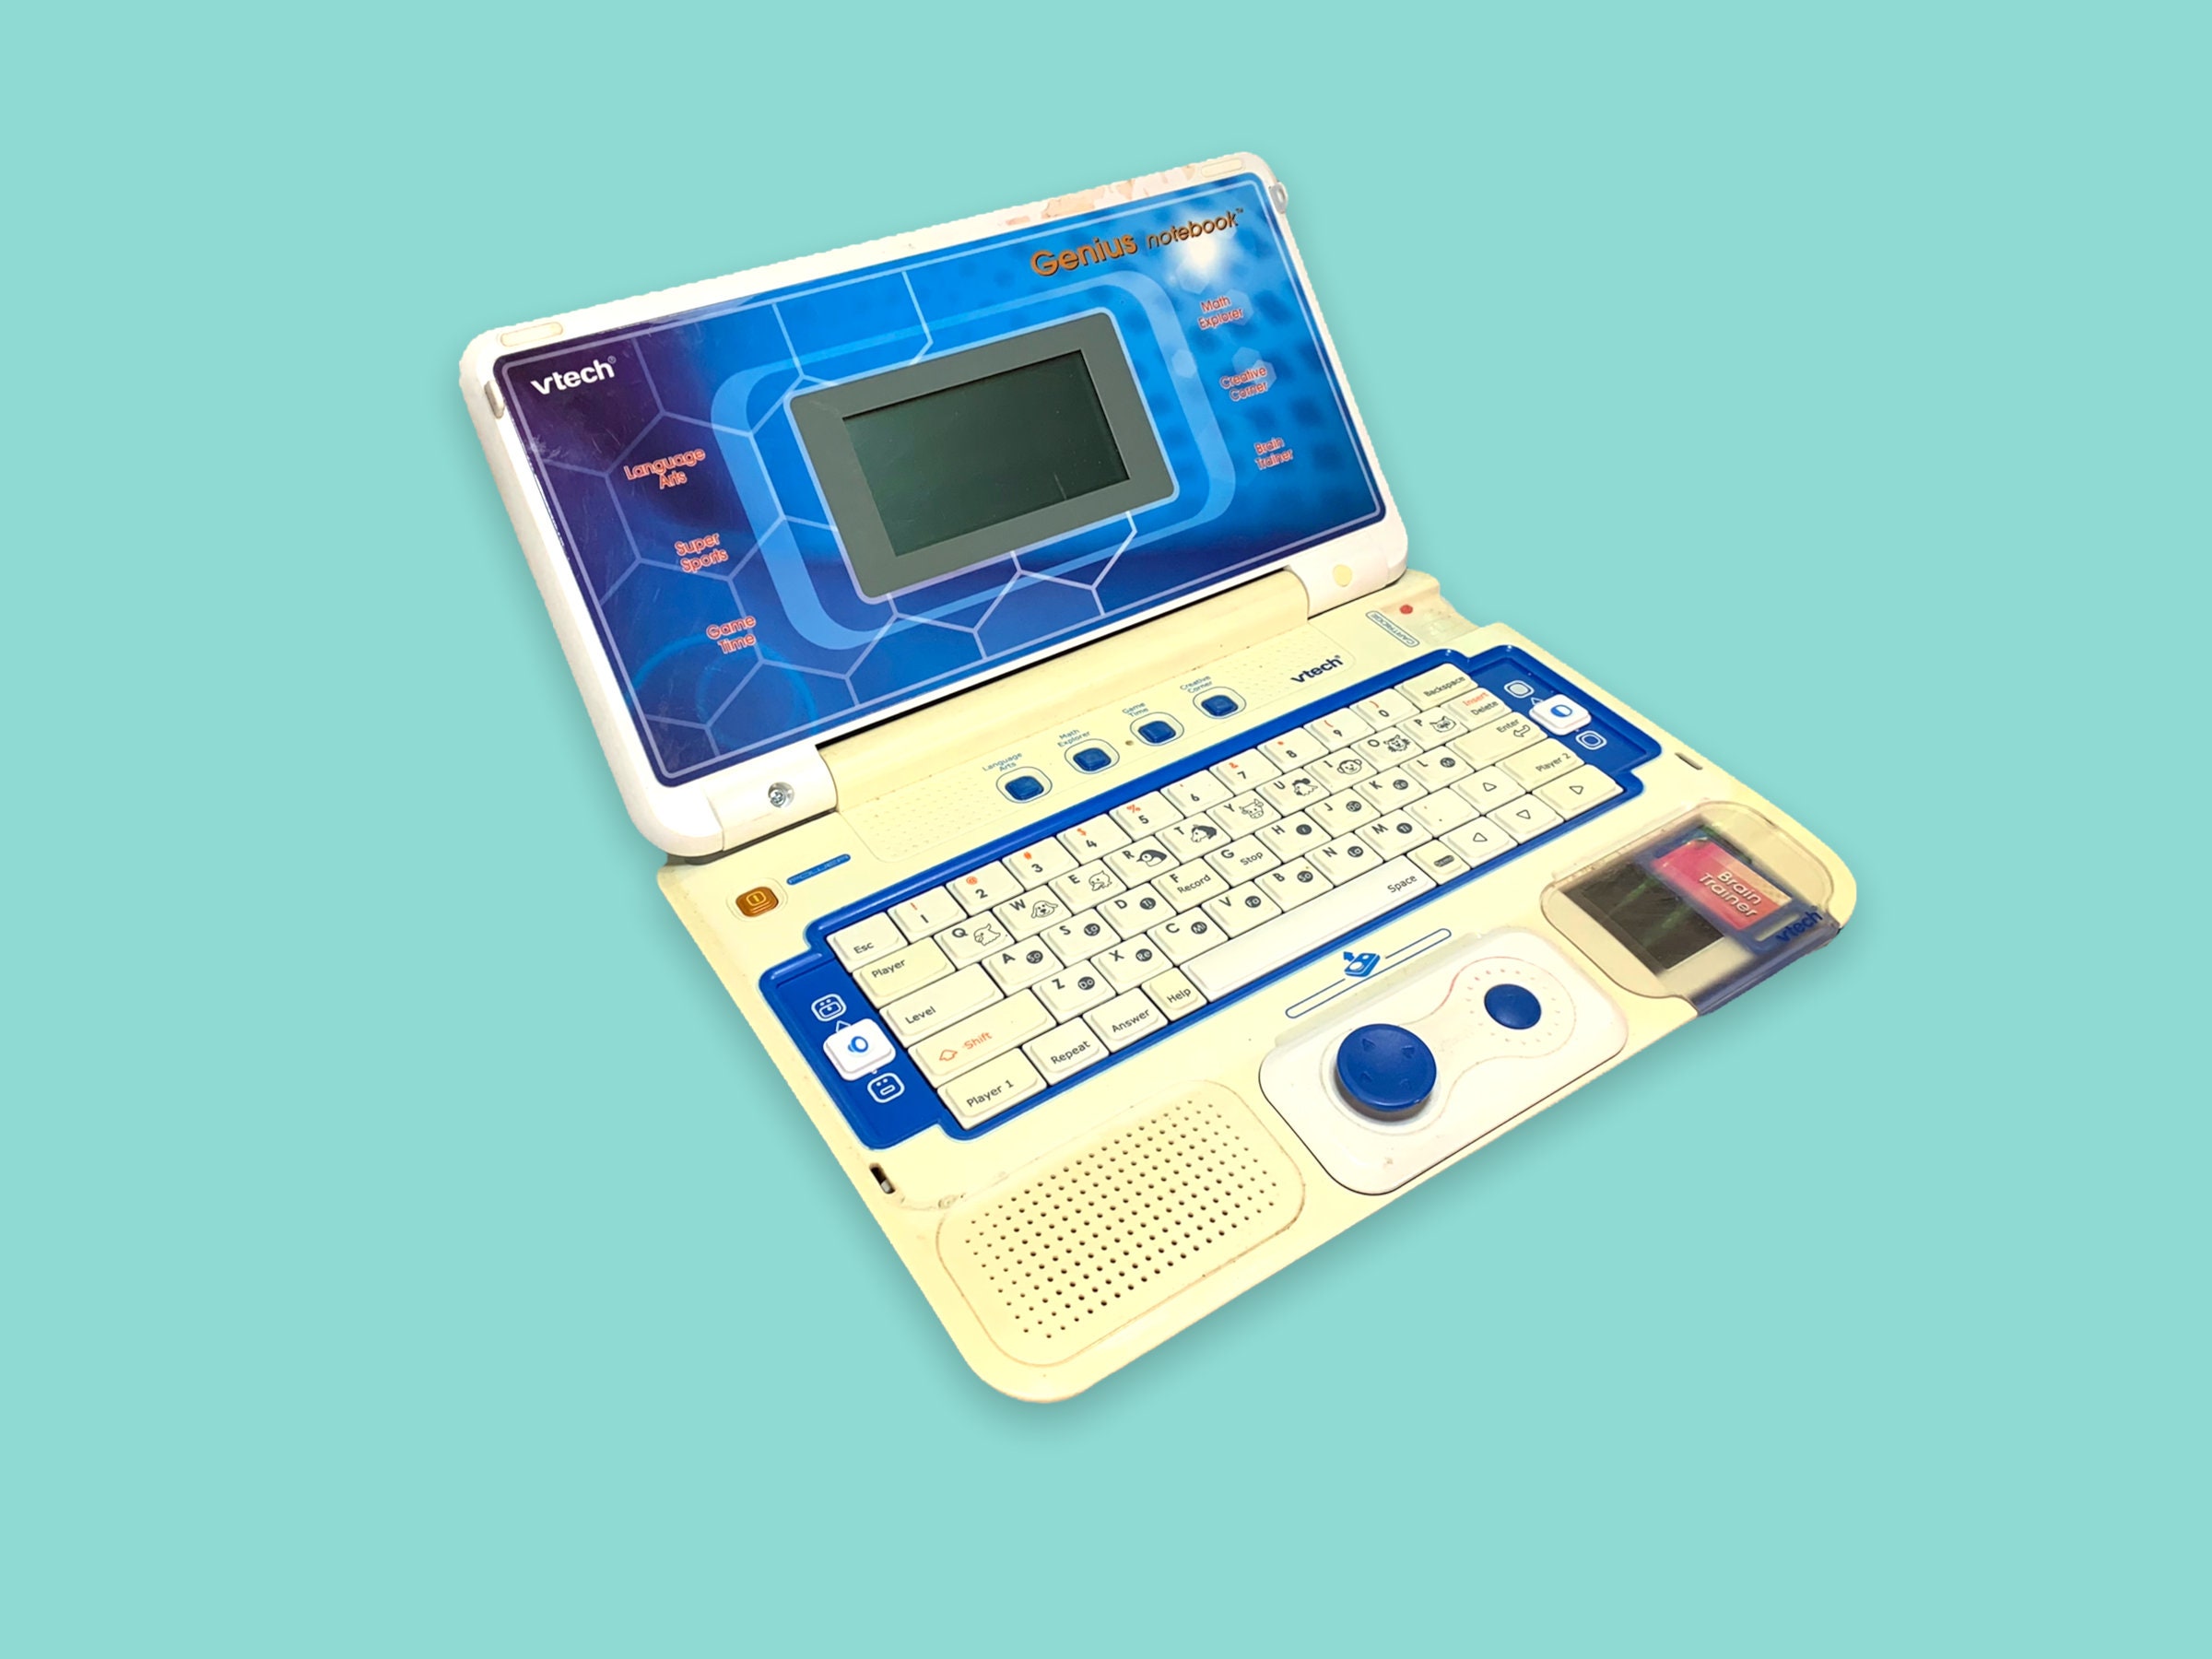 Rare Vtech Double Team Laptop Vintage 90s Game Learning